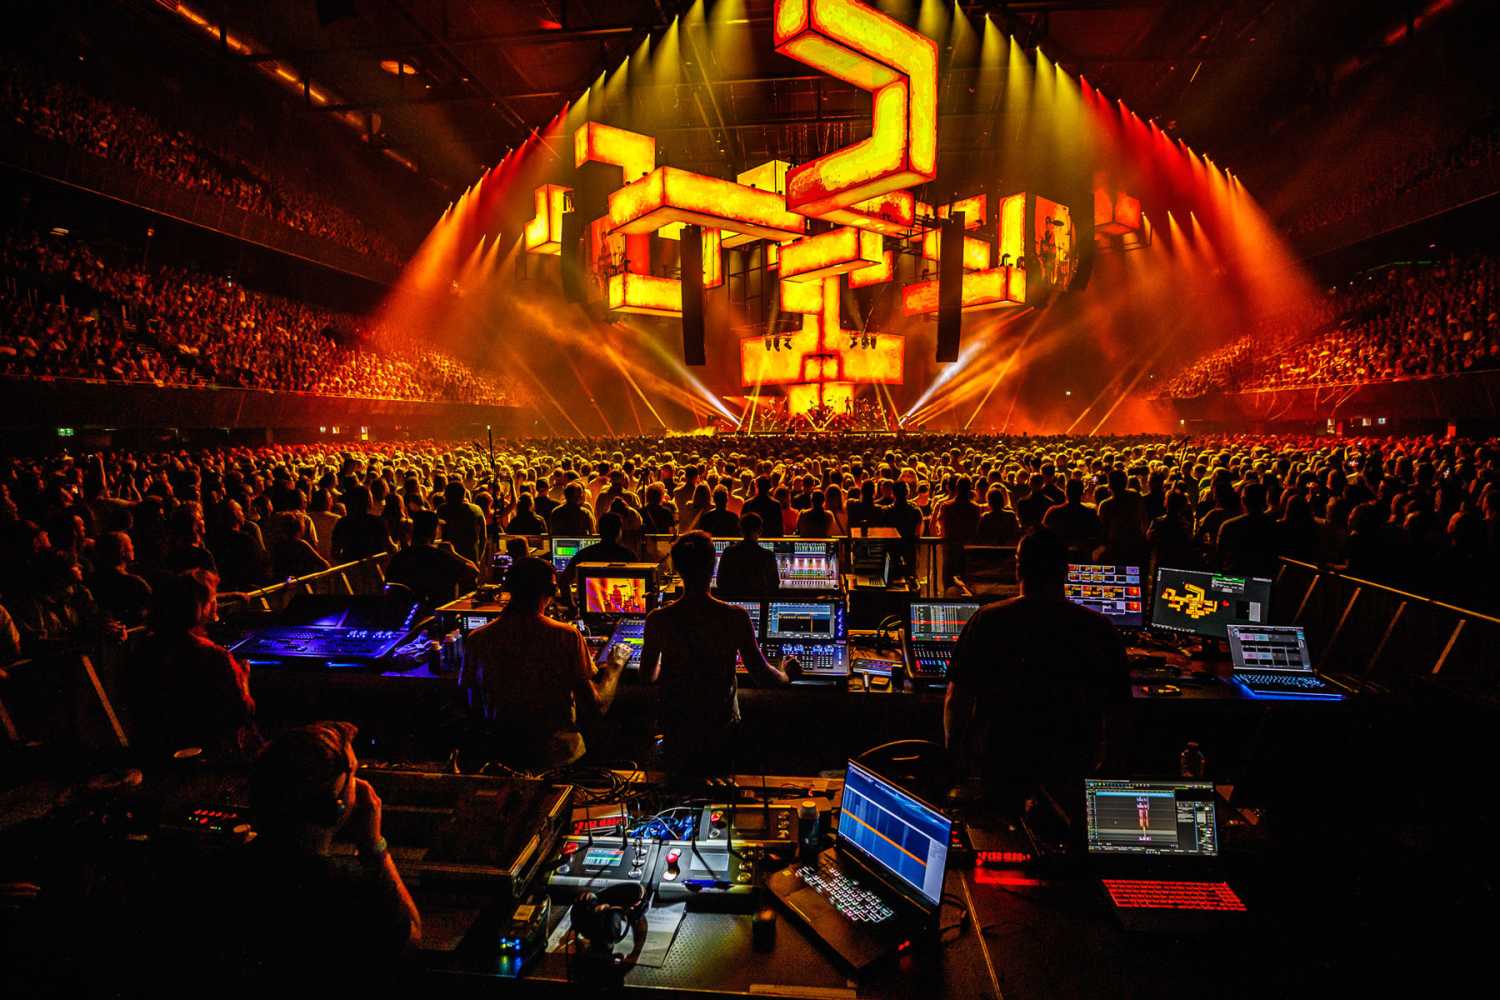 The tightly coordinated show turned the Ziggo Dome into an immersive 3D galaxy of images